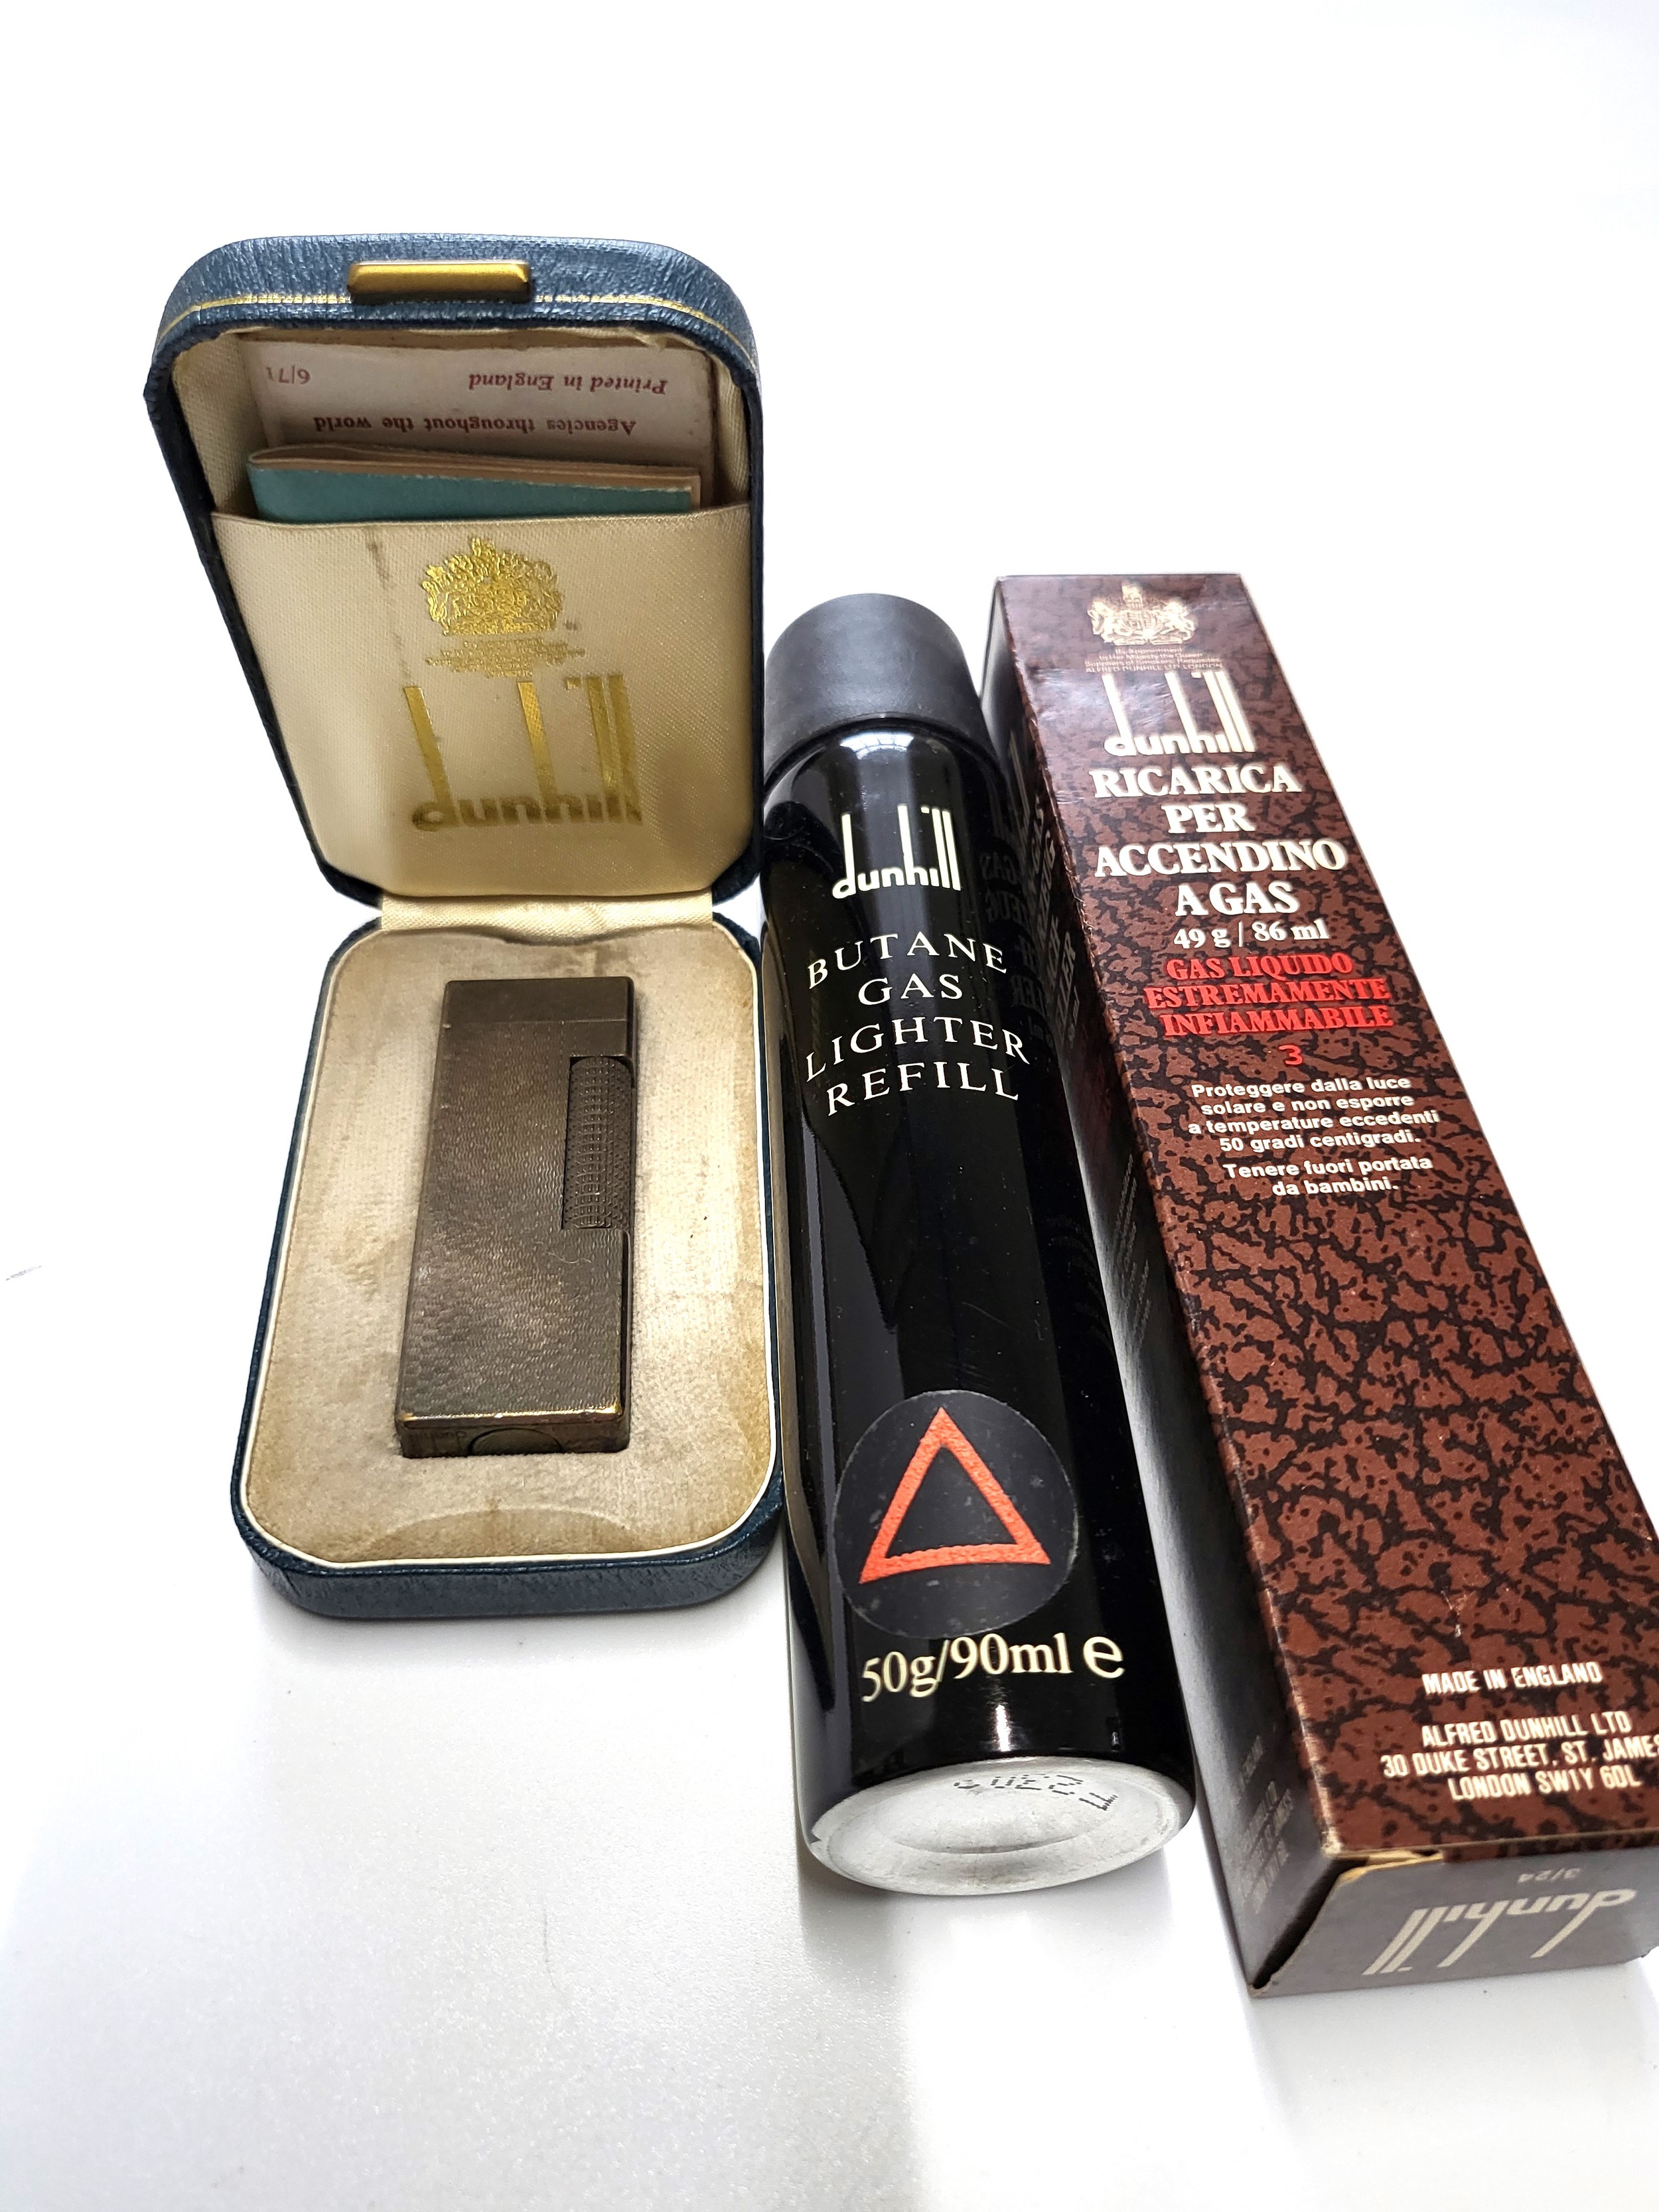 Dunhill lighter in original case and paperwork with Dunhill lighter refill